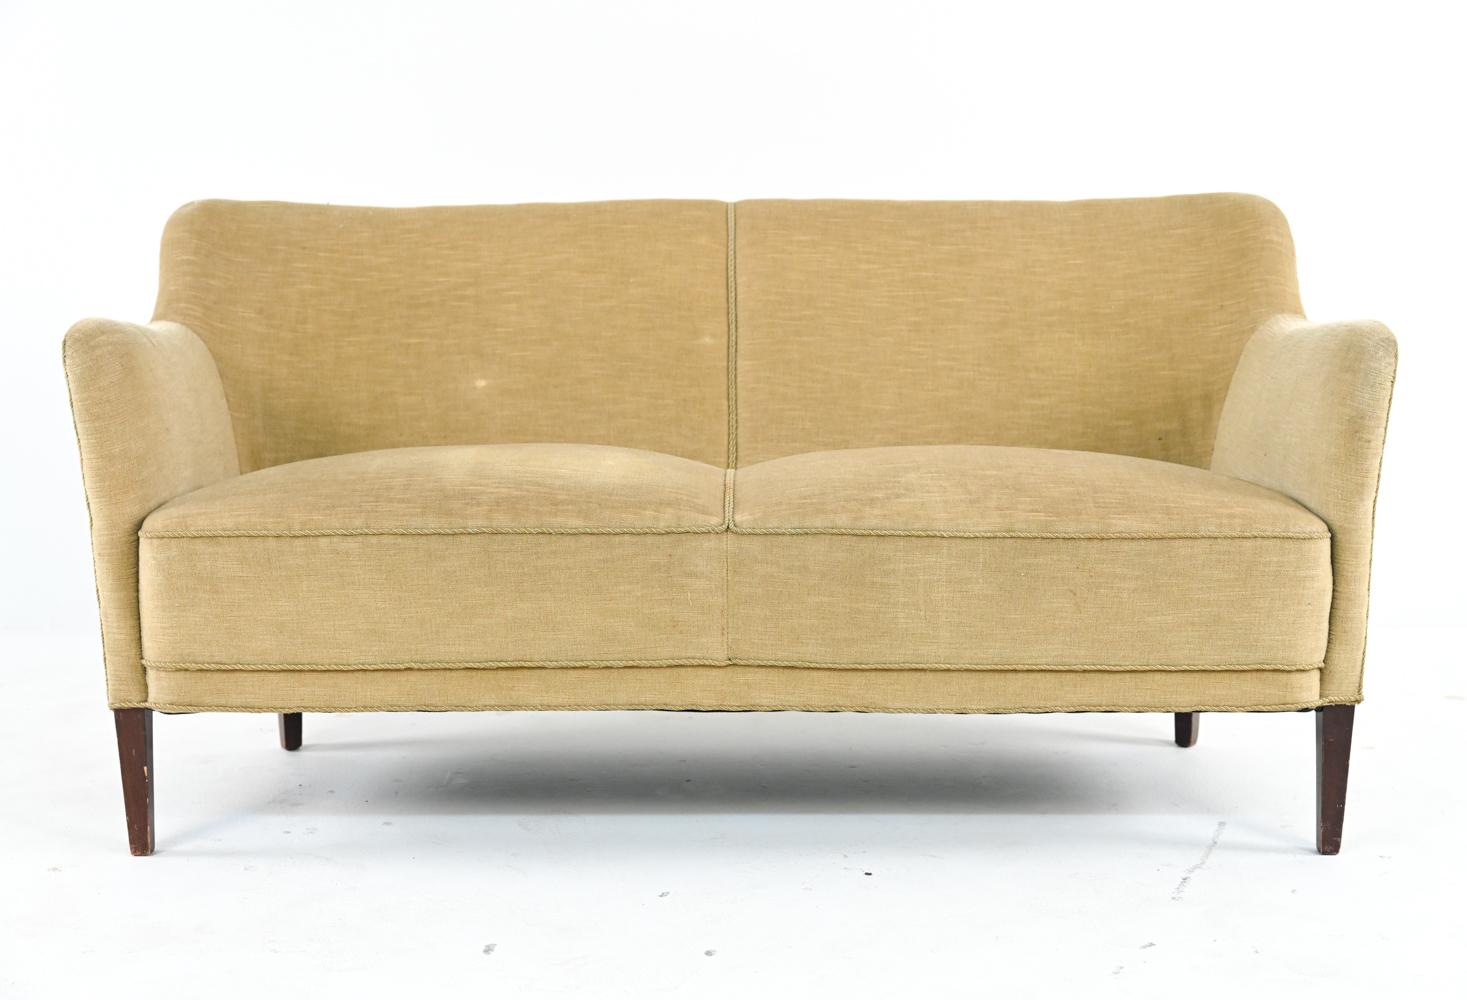 With its playful sculptural modern silhouette and chartreuse slubbed mohair chenille upholstery, this settee is like a breath of verdant spring air. Perched atop tapered legs of stained beechwood, this piece features a classic Danish bench seat and